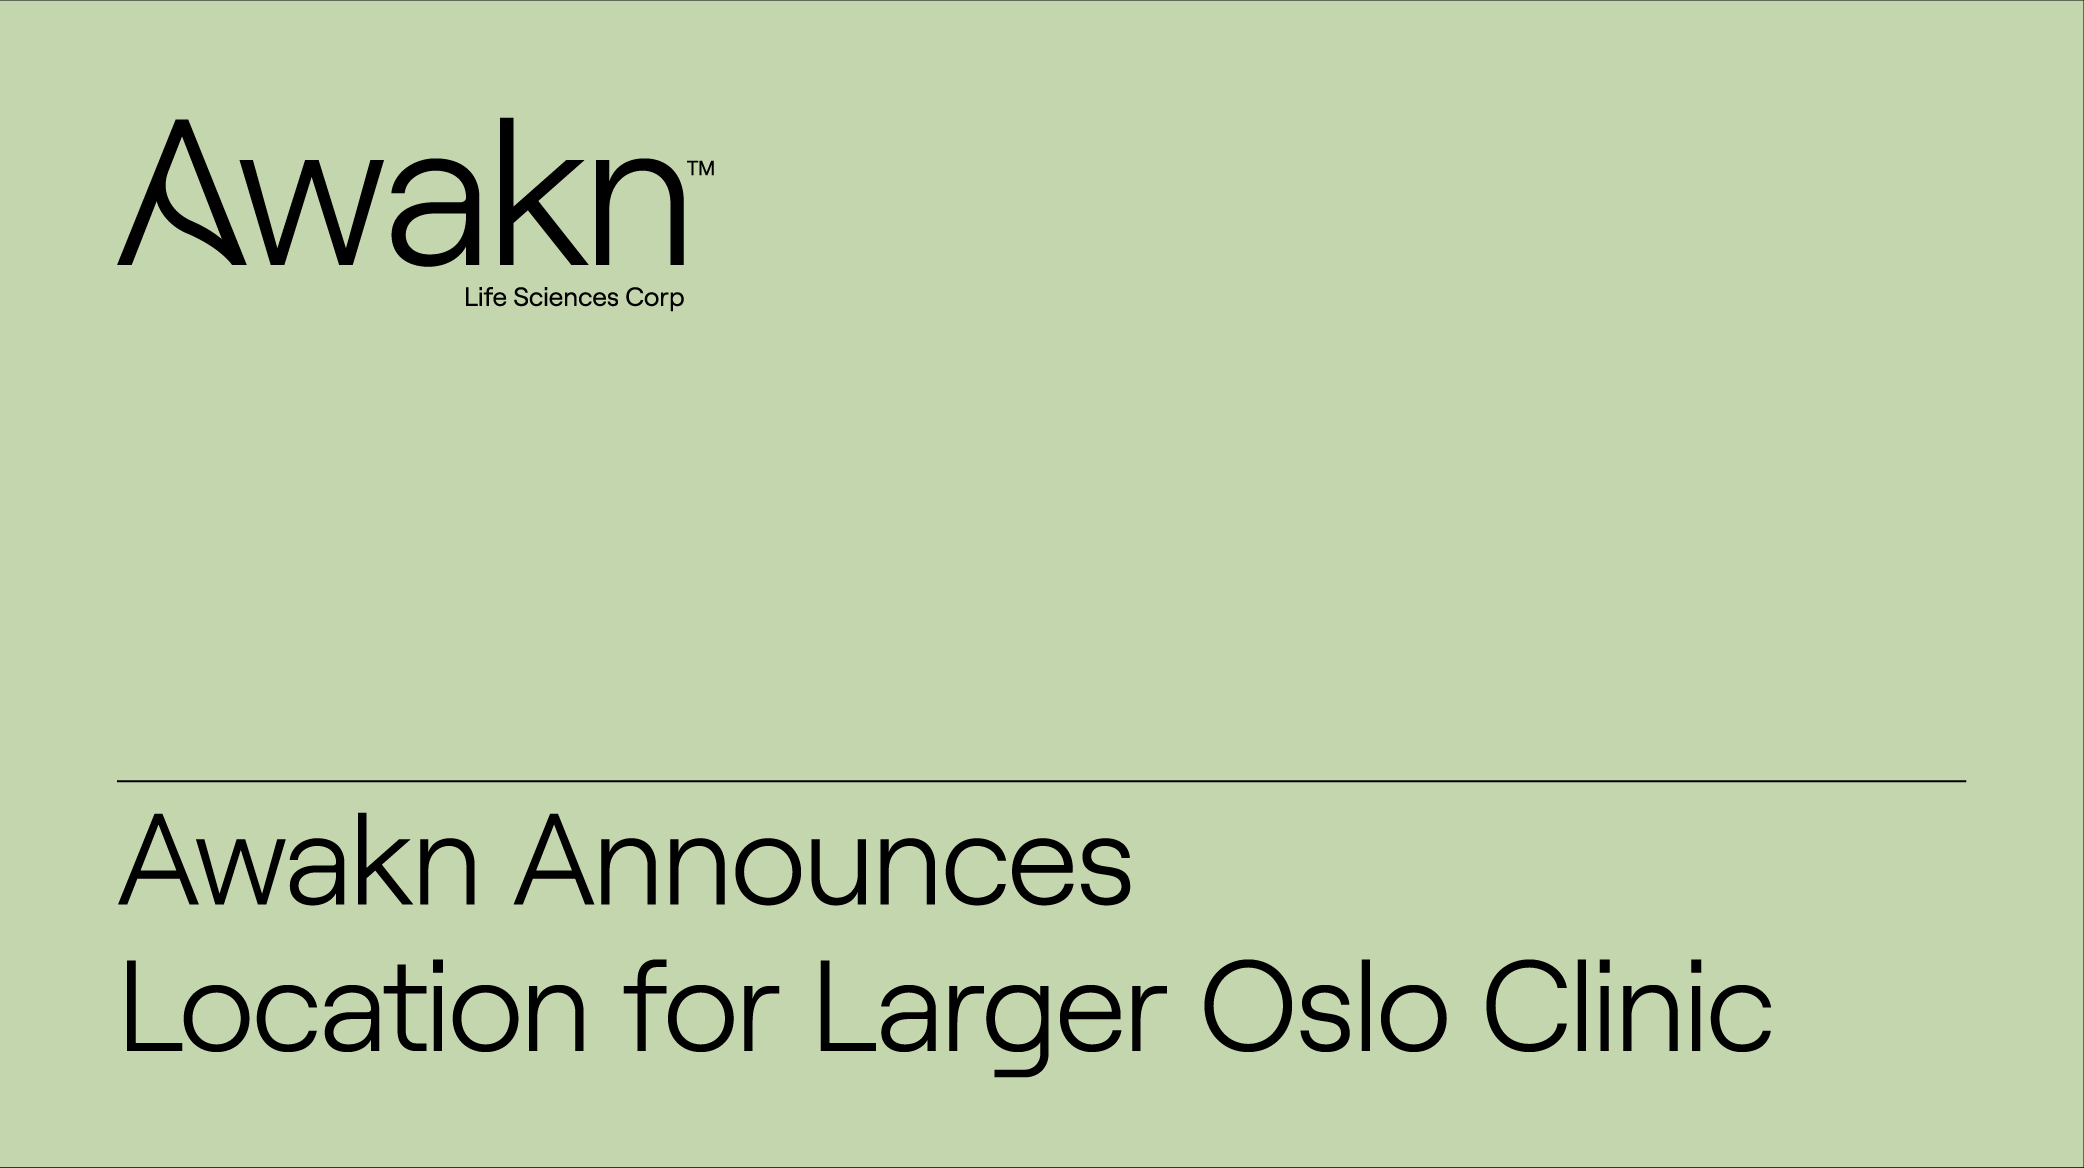 Awakn Life Sciences Announces Location for Larger Oslo Clinic